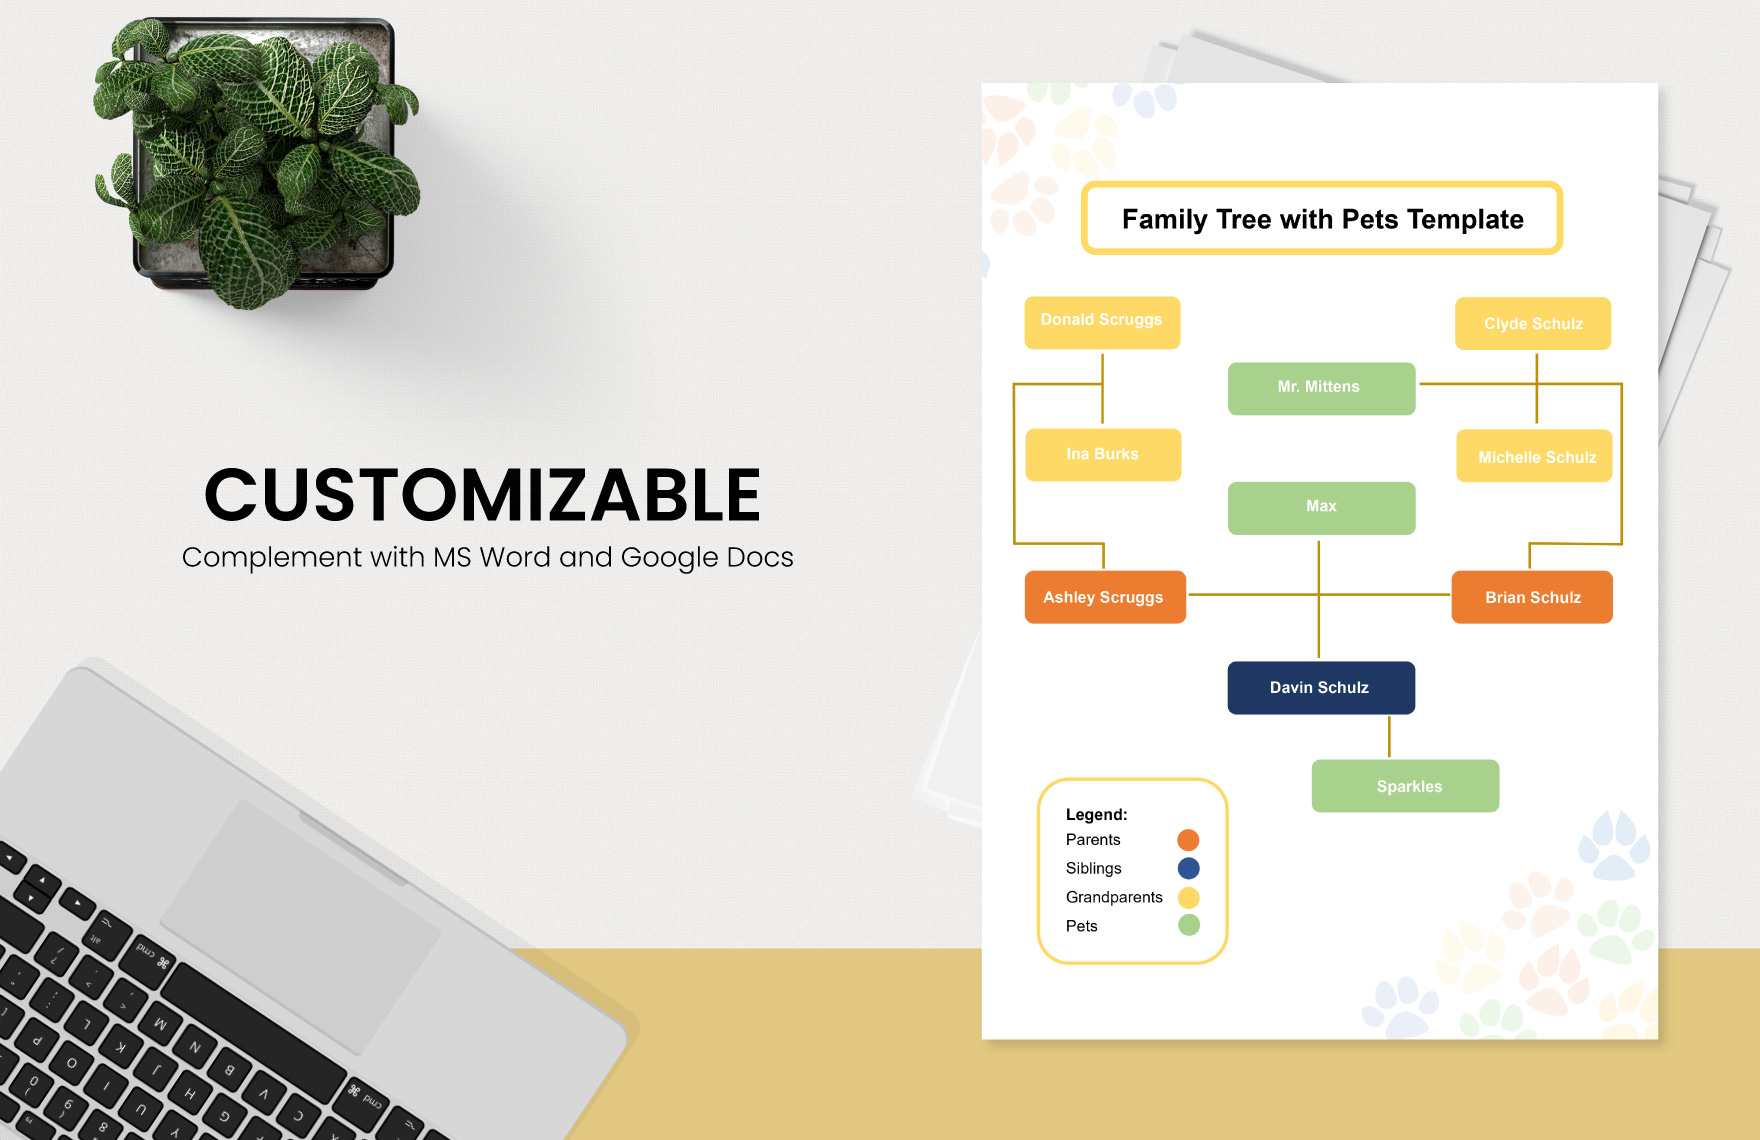 Family Tree with Pets Template